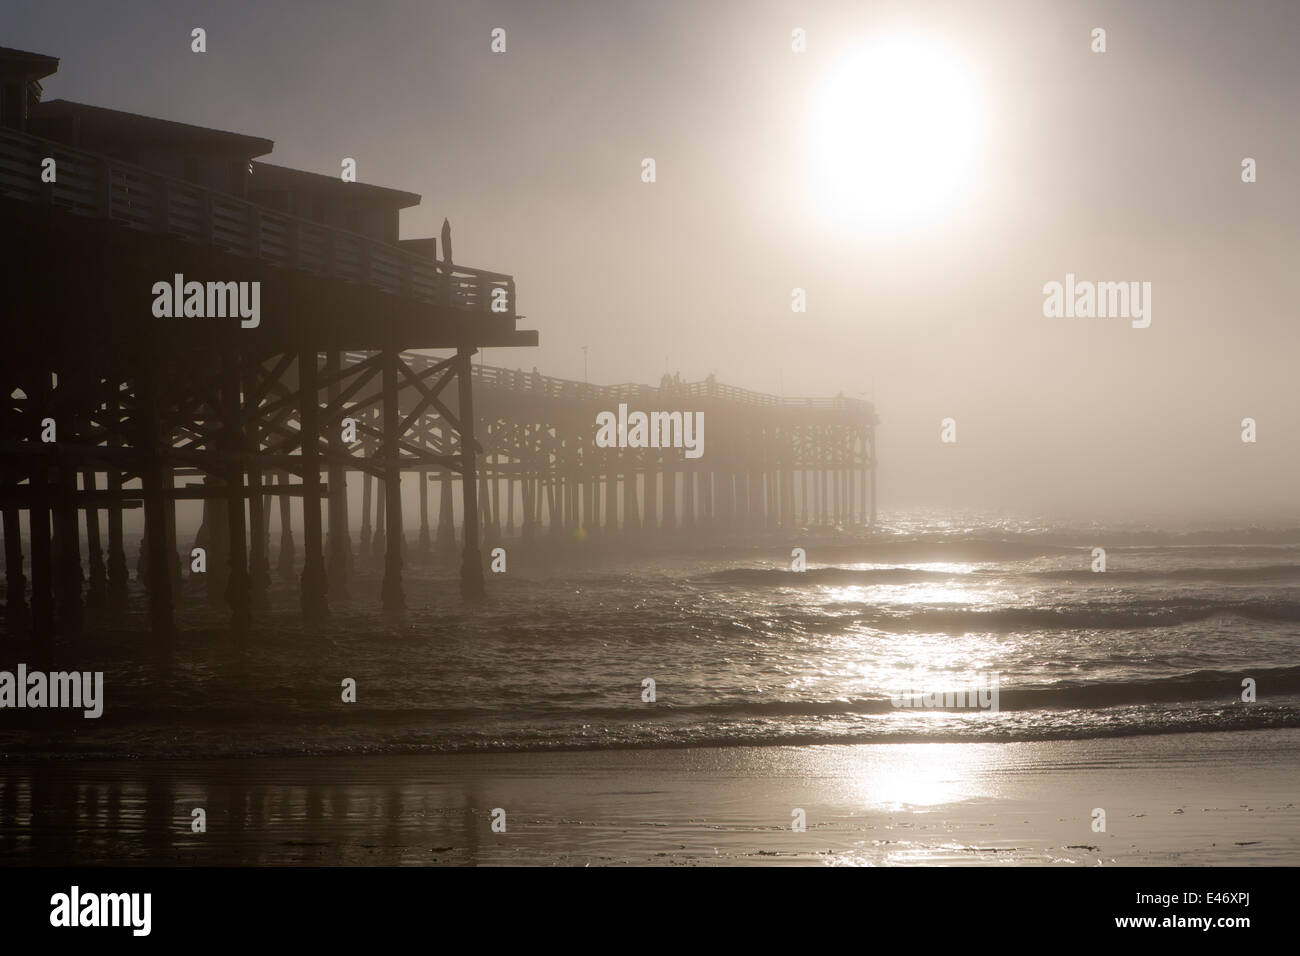 Crystal Pier almost disappears in the fog, illuminated by the late afternoon sun. Stock Photo